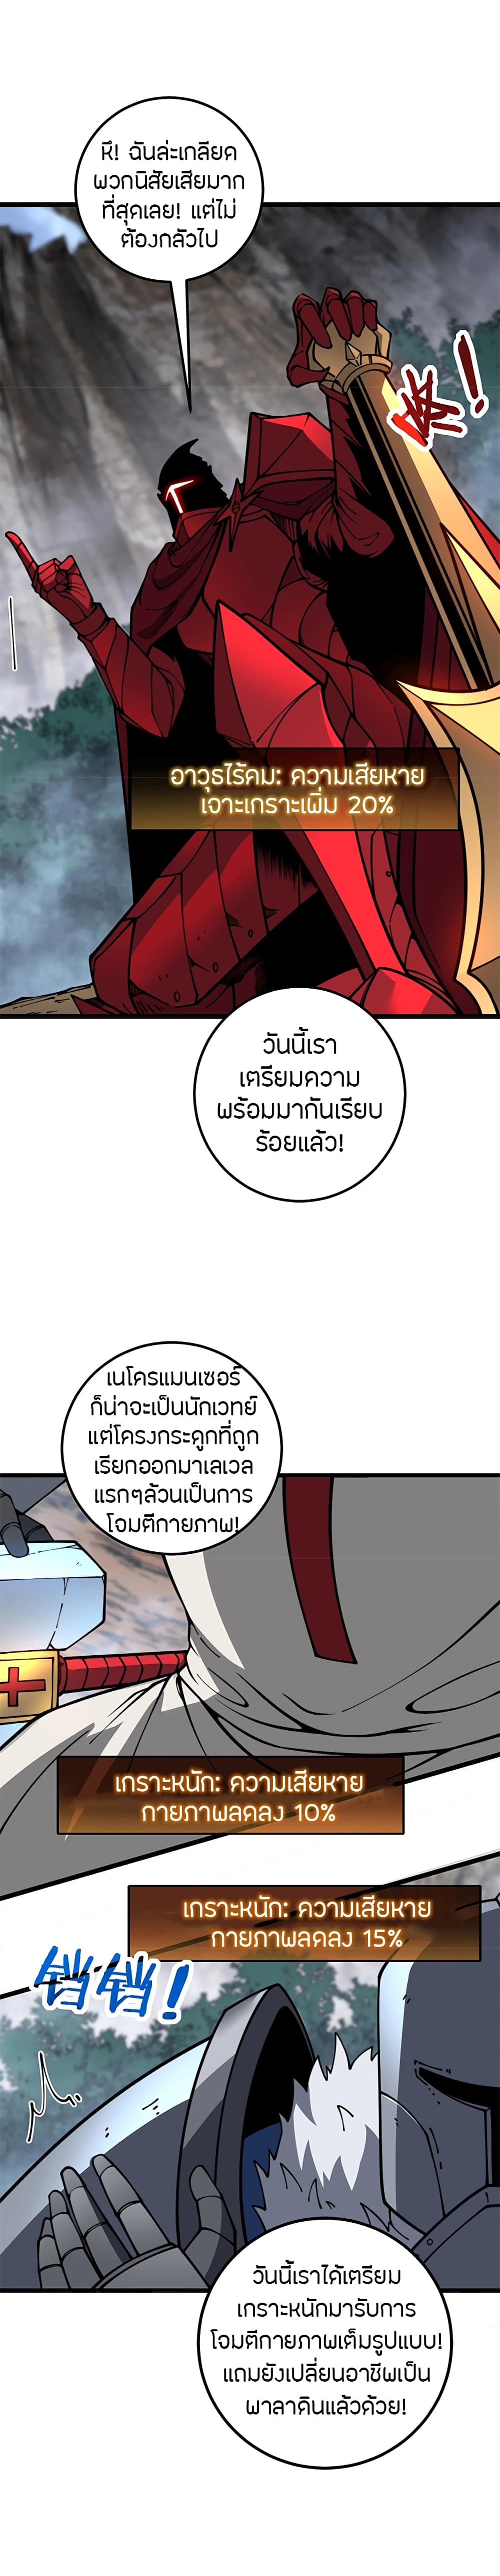 Skeleton Evolution It Starts With Being Summon by a Goddess ตอนที่ 8 (7)